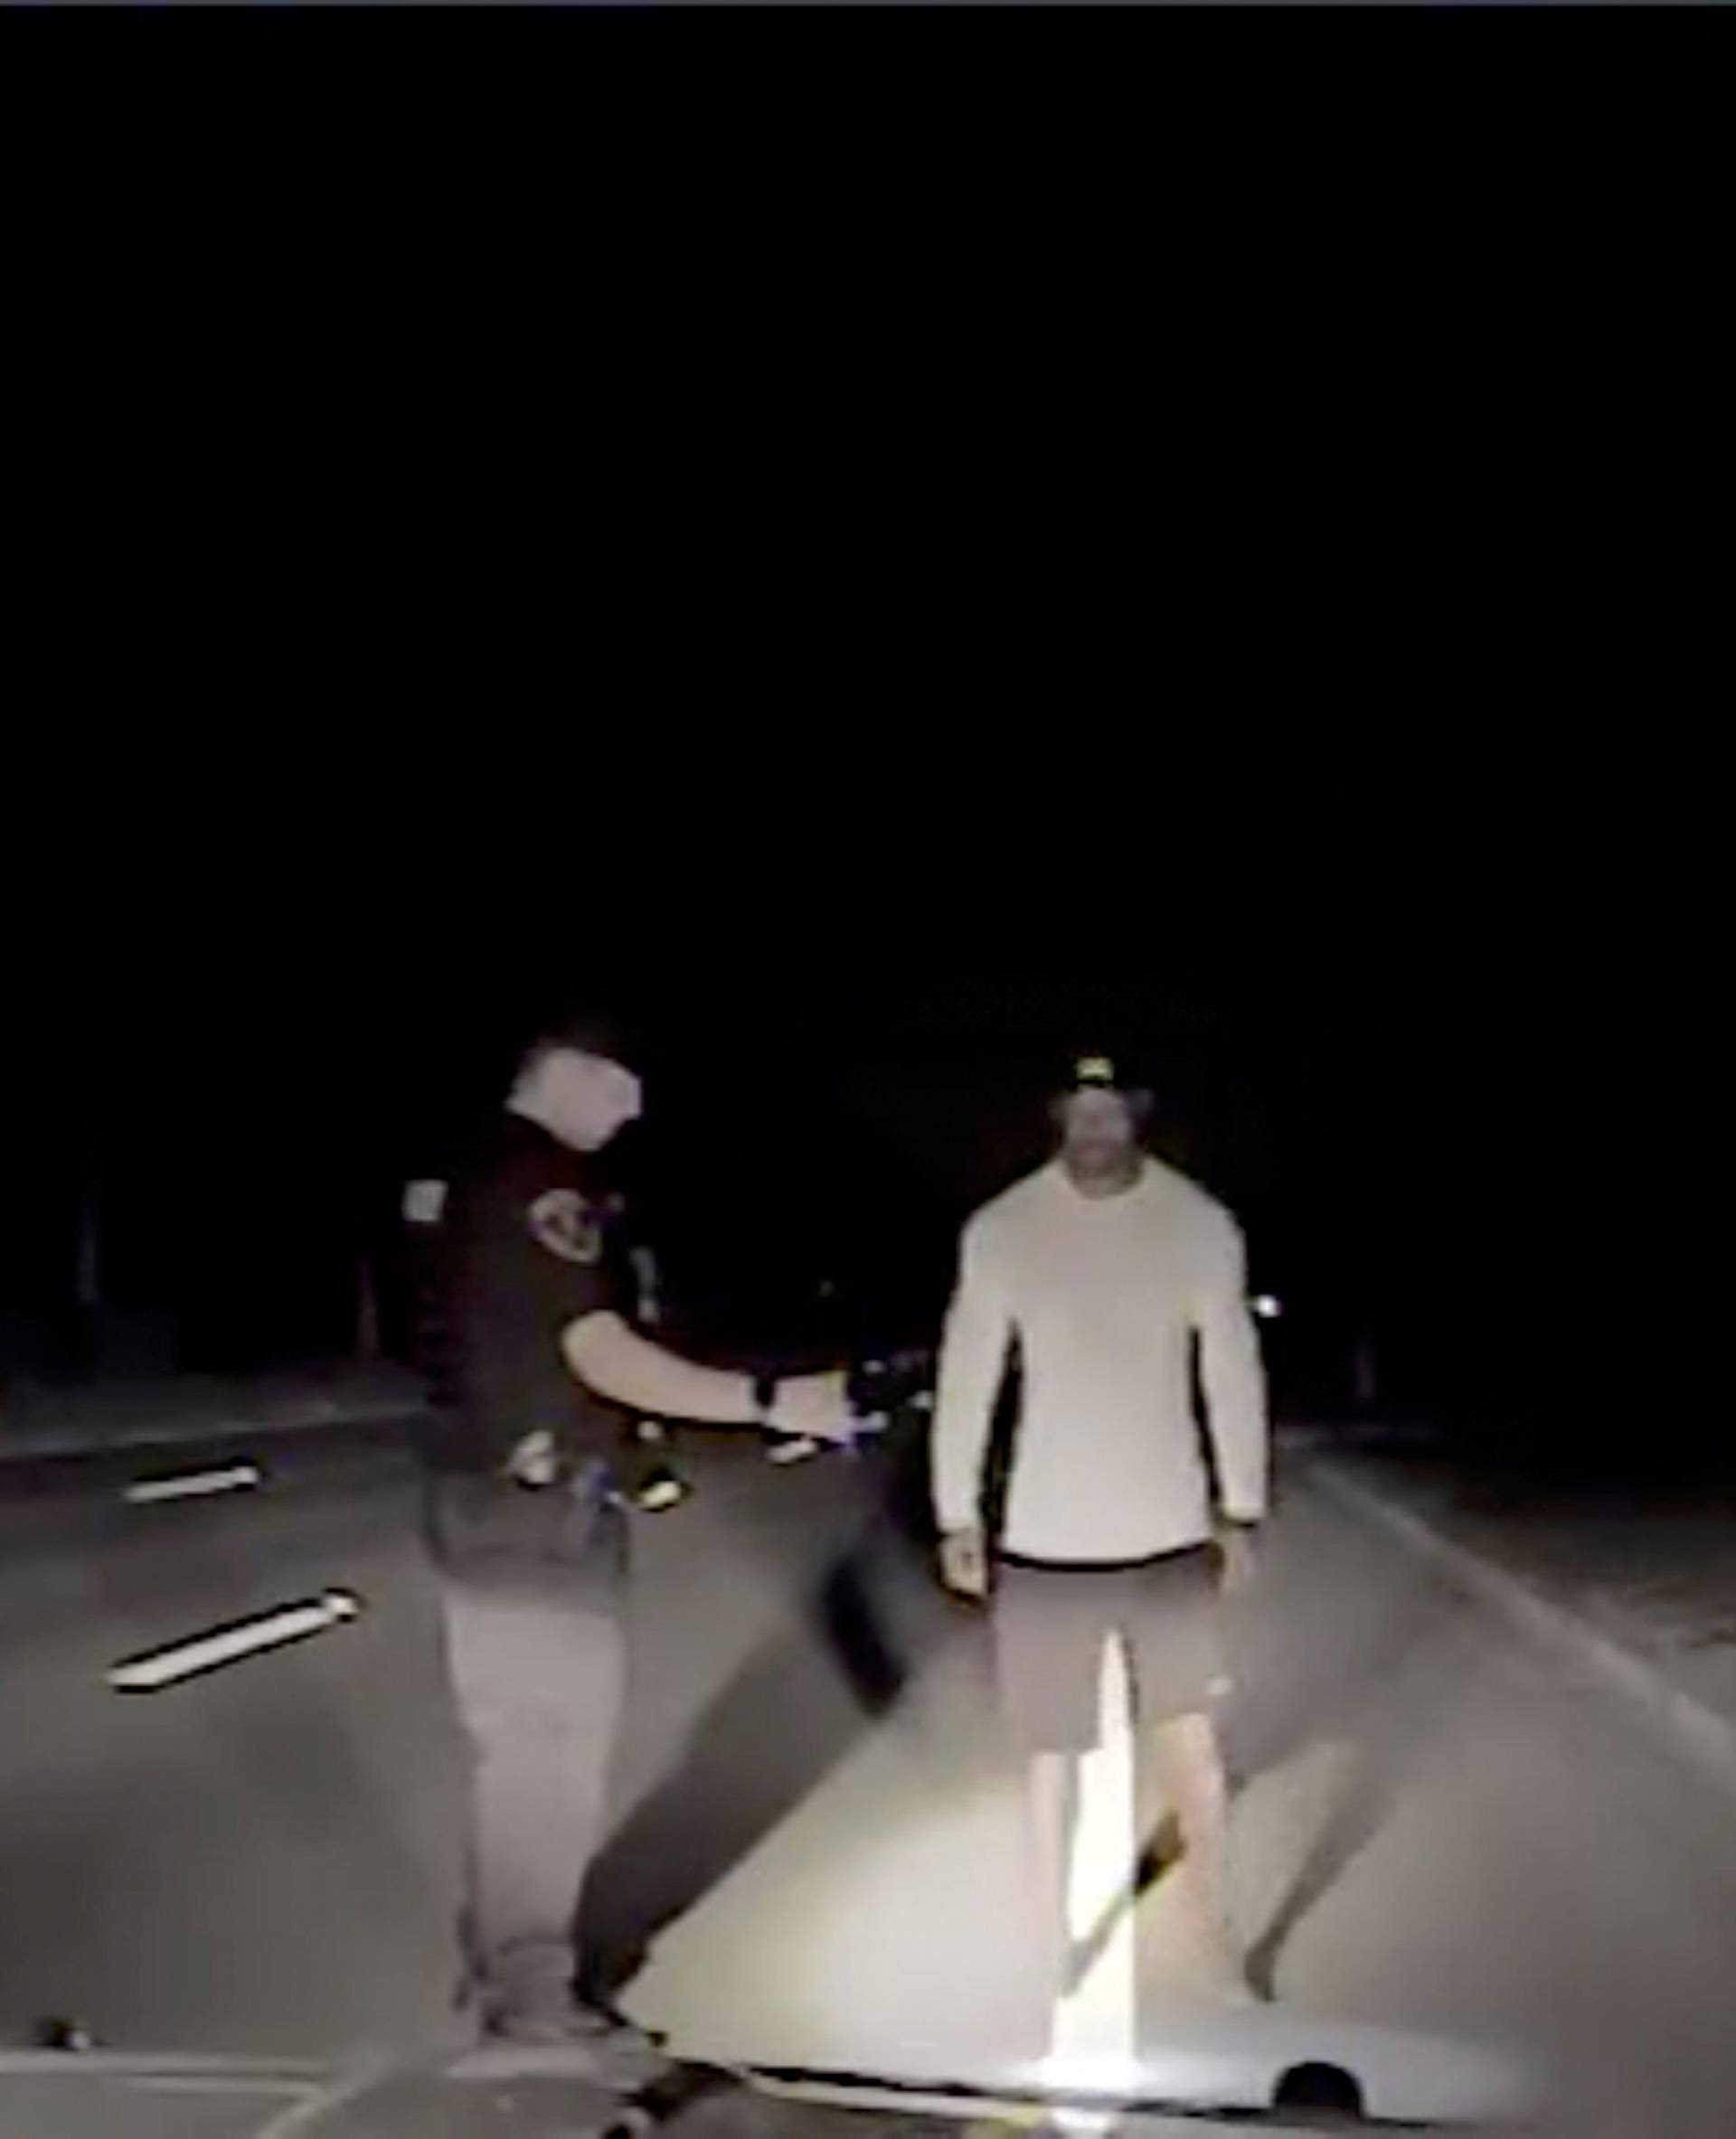 Tiger Woods is seen performing field sobriety tests following orders from a police officer in this still image from police dashcam video in Jupiter